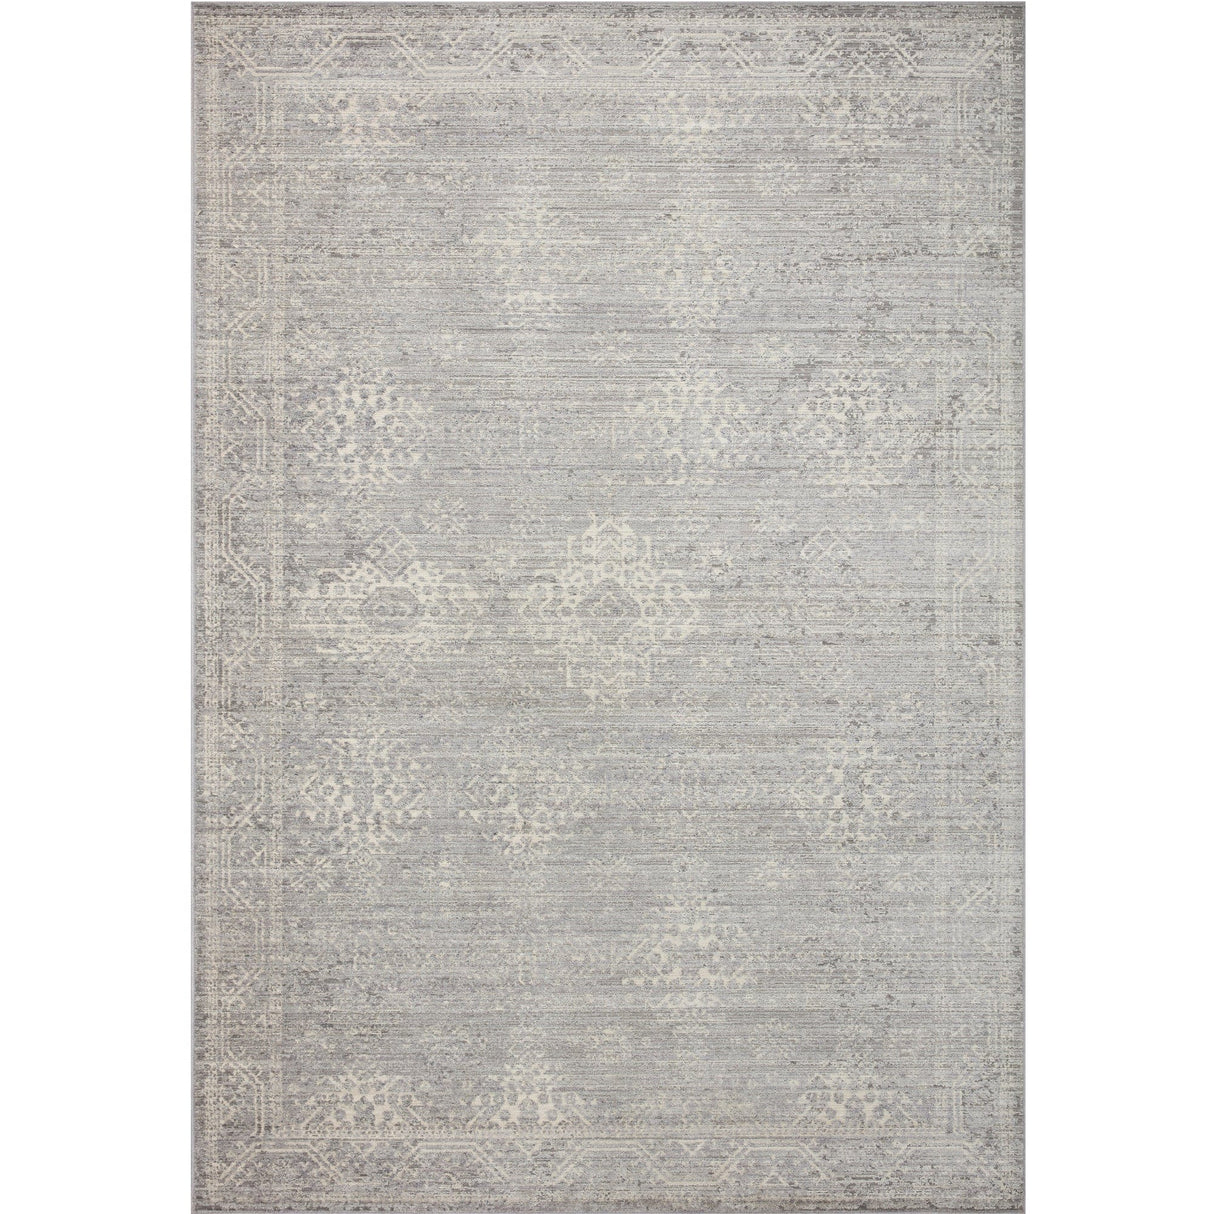 Loloi Ingrid Rug - Silver/Charcoal Rugs